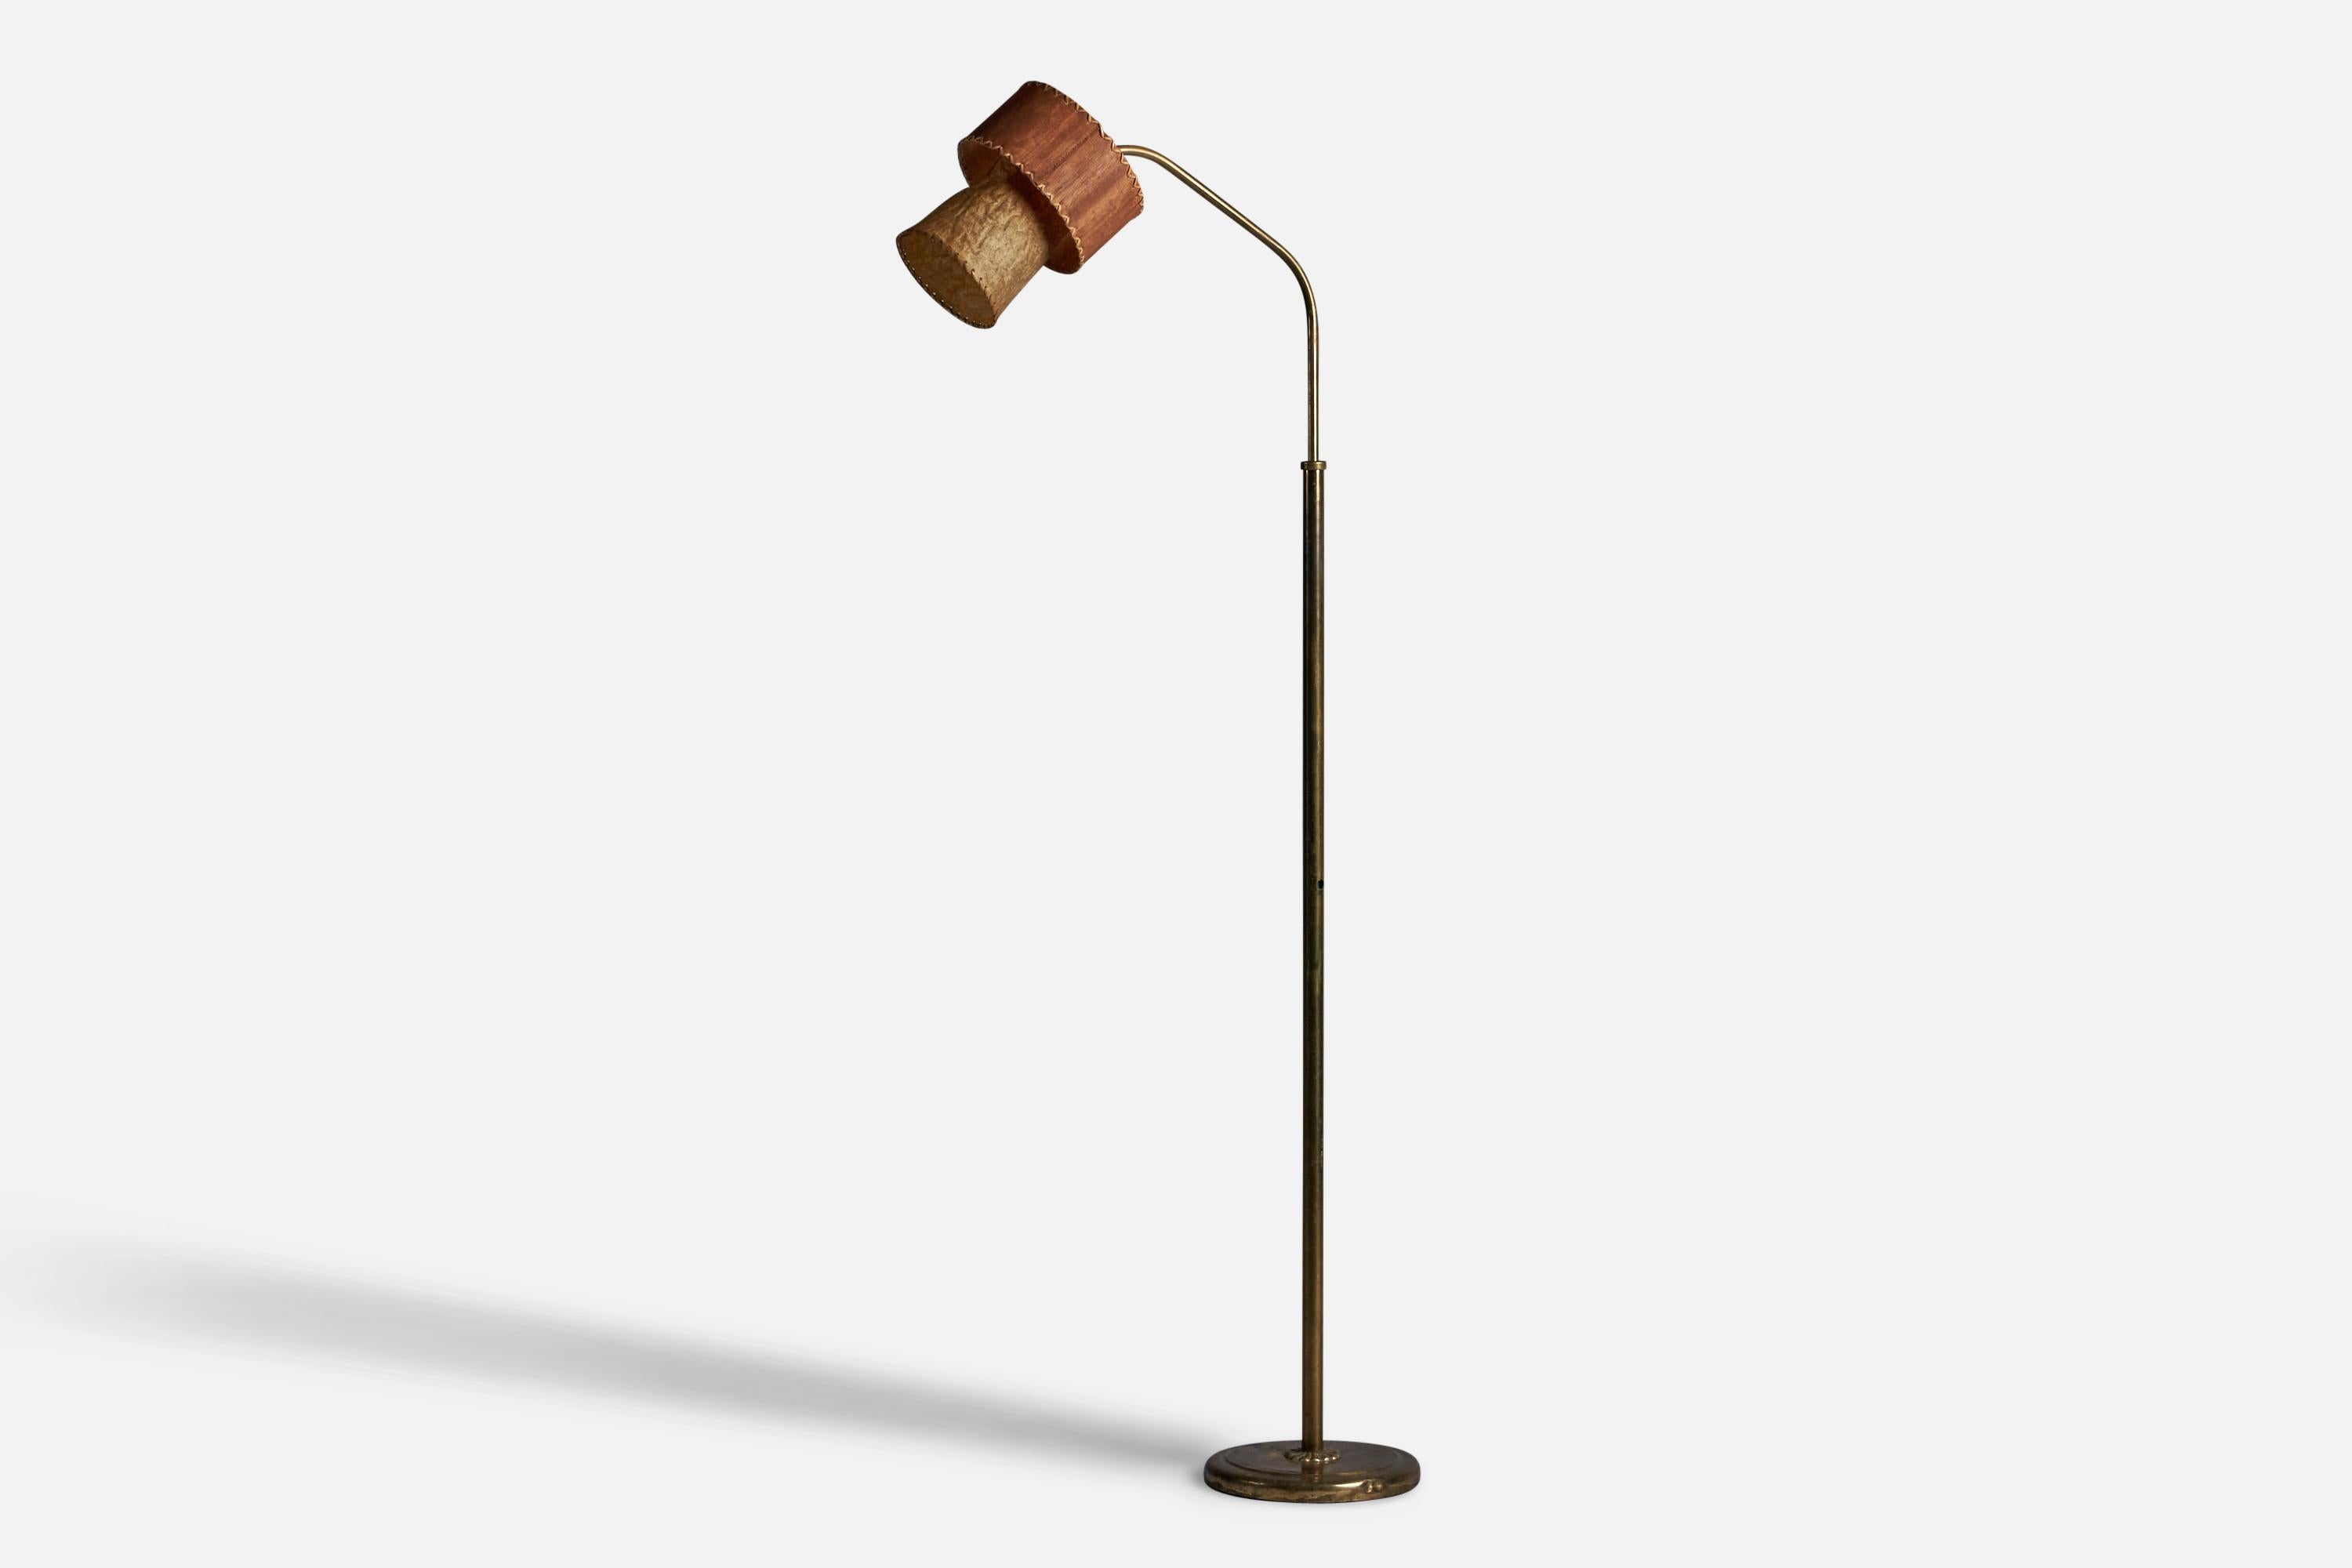 An adjustable brass, wood veneer, and paper floor lamp designed and produced in Denmark, c. 1930s.

Overall Dimensions (inches): 63” H x 9.75” W x 26” D
Bulb Specifications: E-26 Bulb
Number of Sockets: 1
